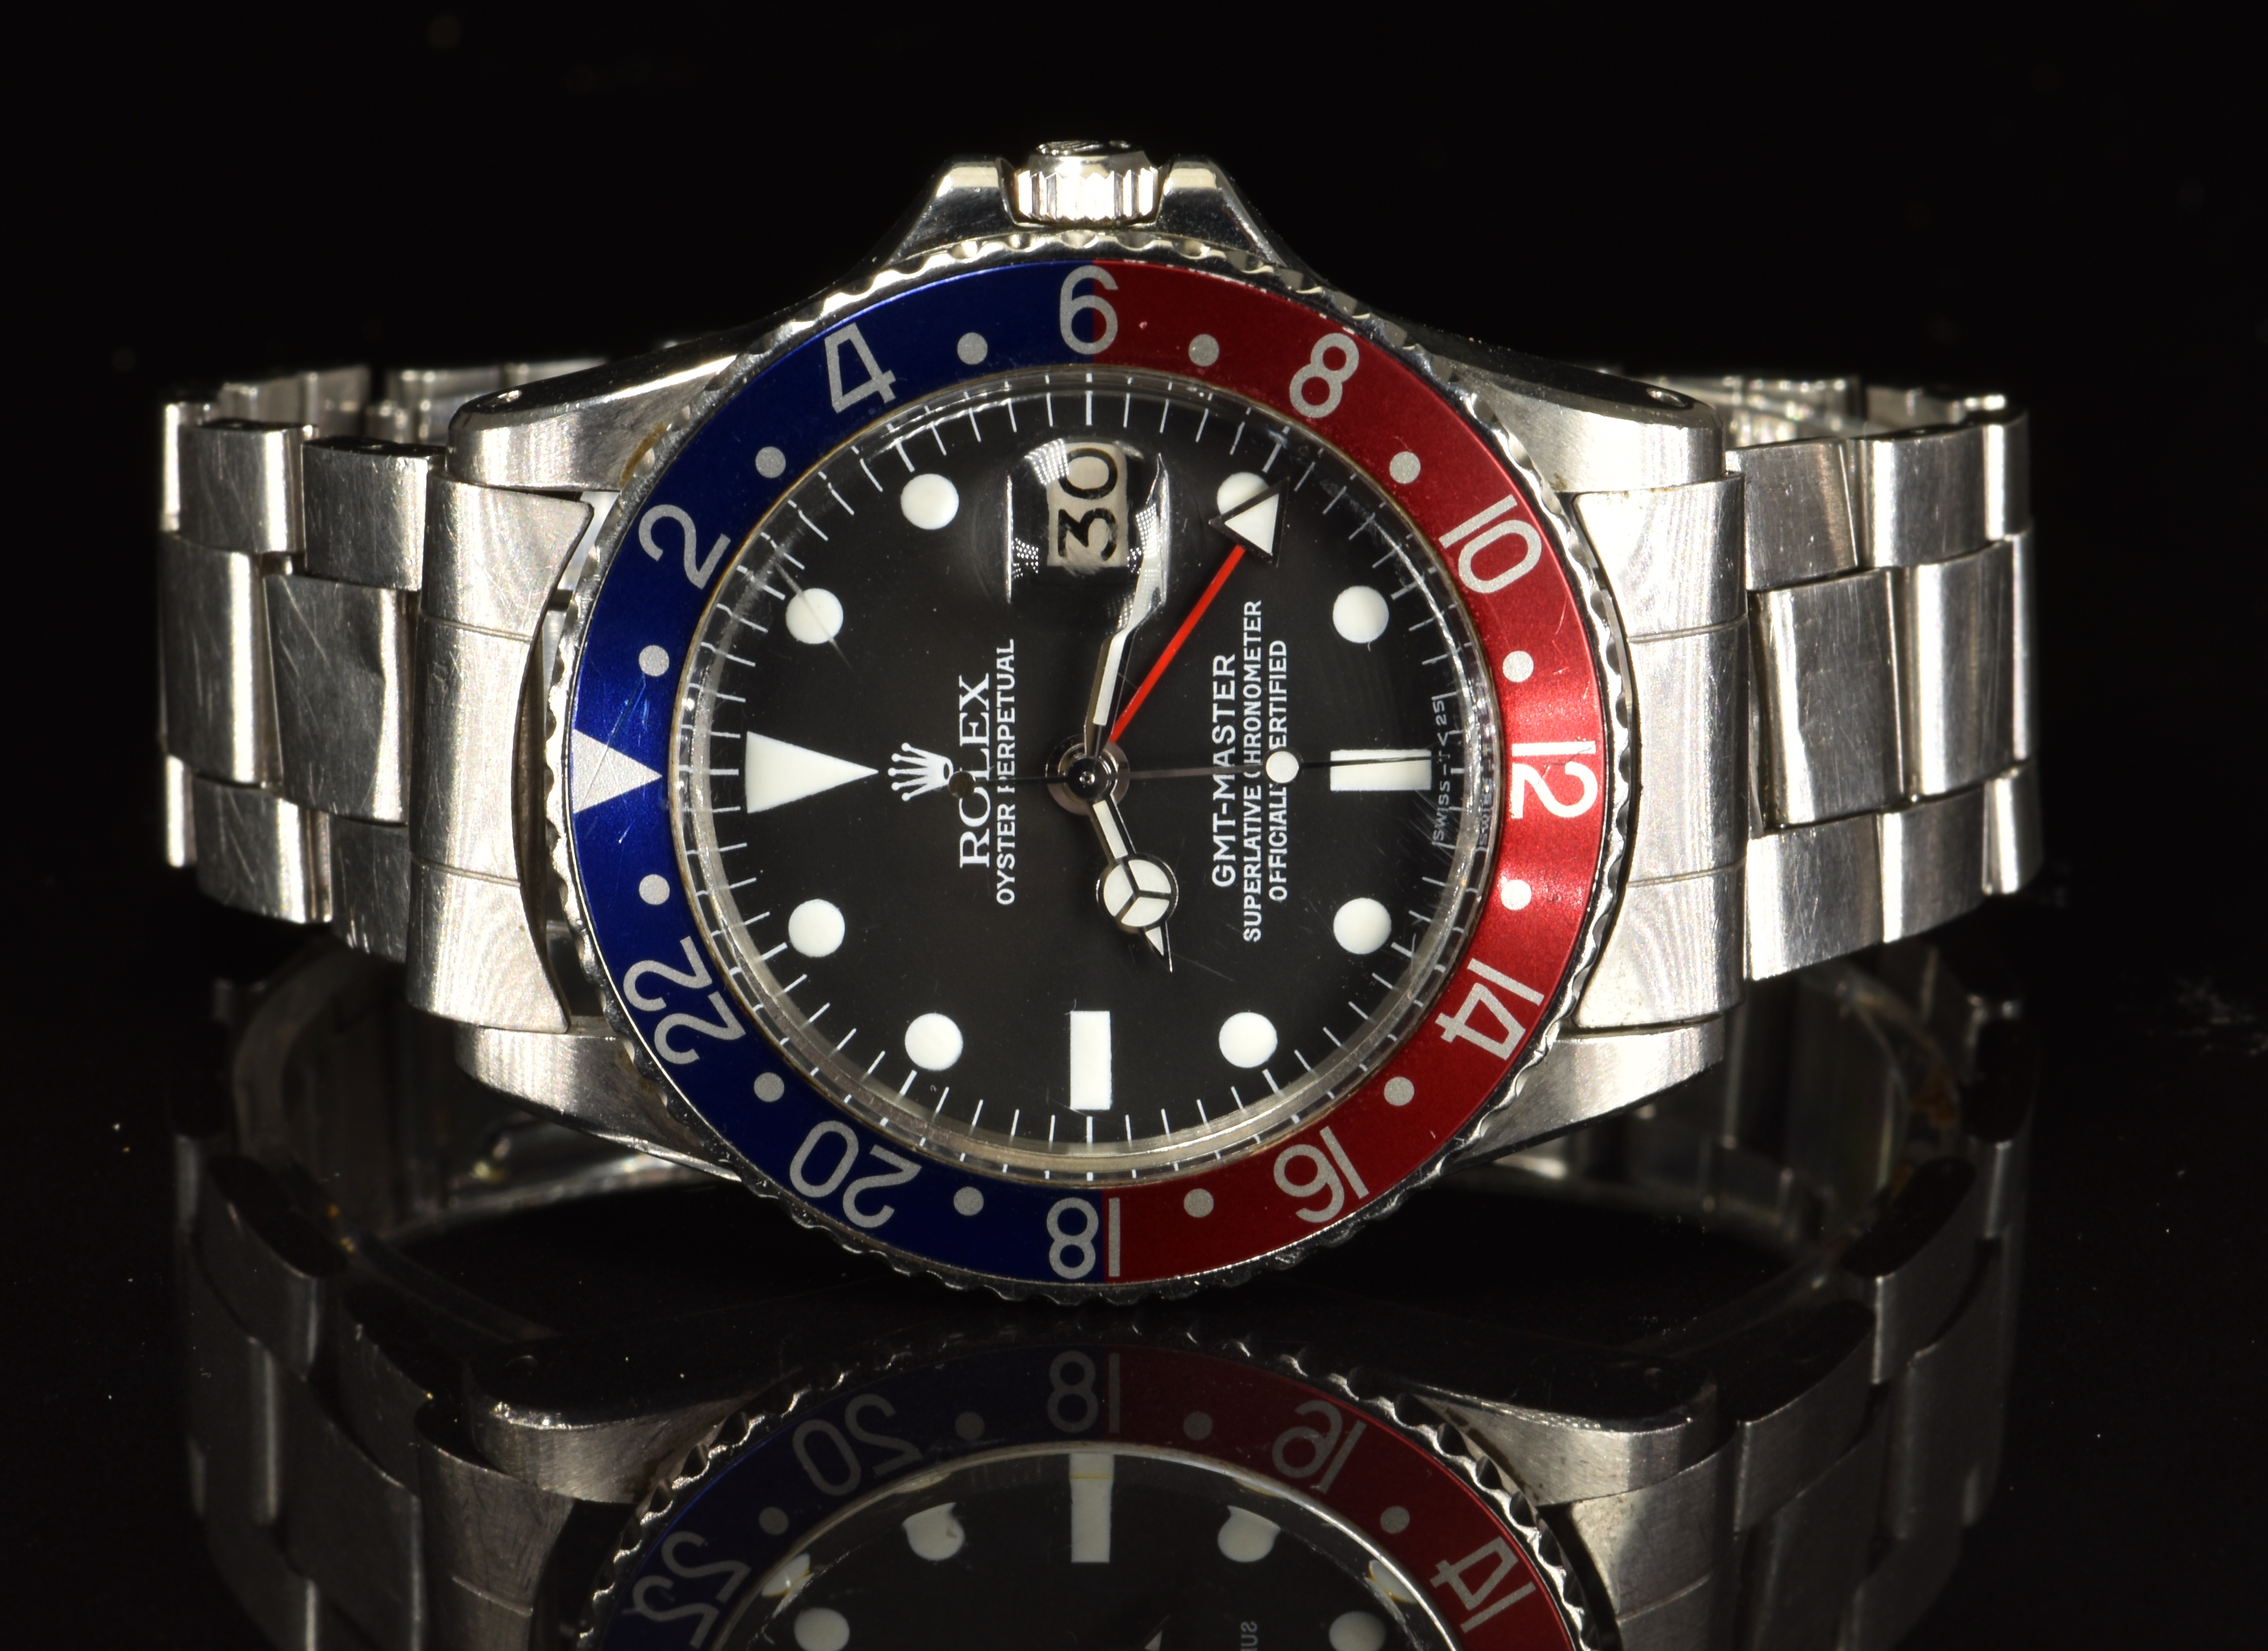 Rolex Oyster Perpetual GMT Master gentleman's automatic wristwatch ref. 1675 with date aperture, - Image 7 of 8